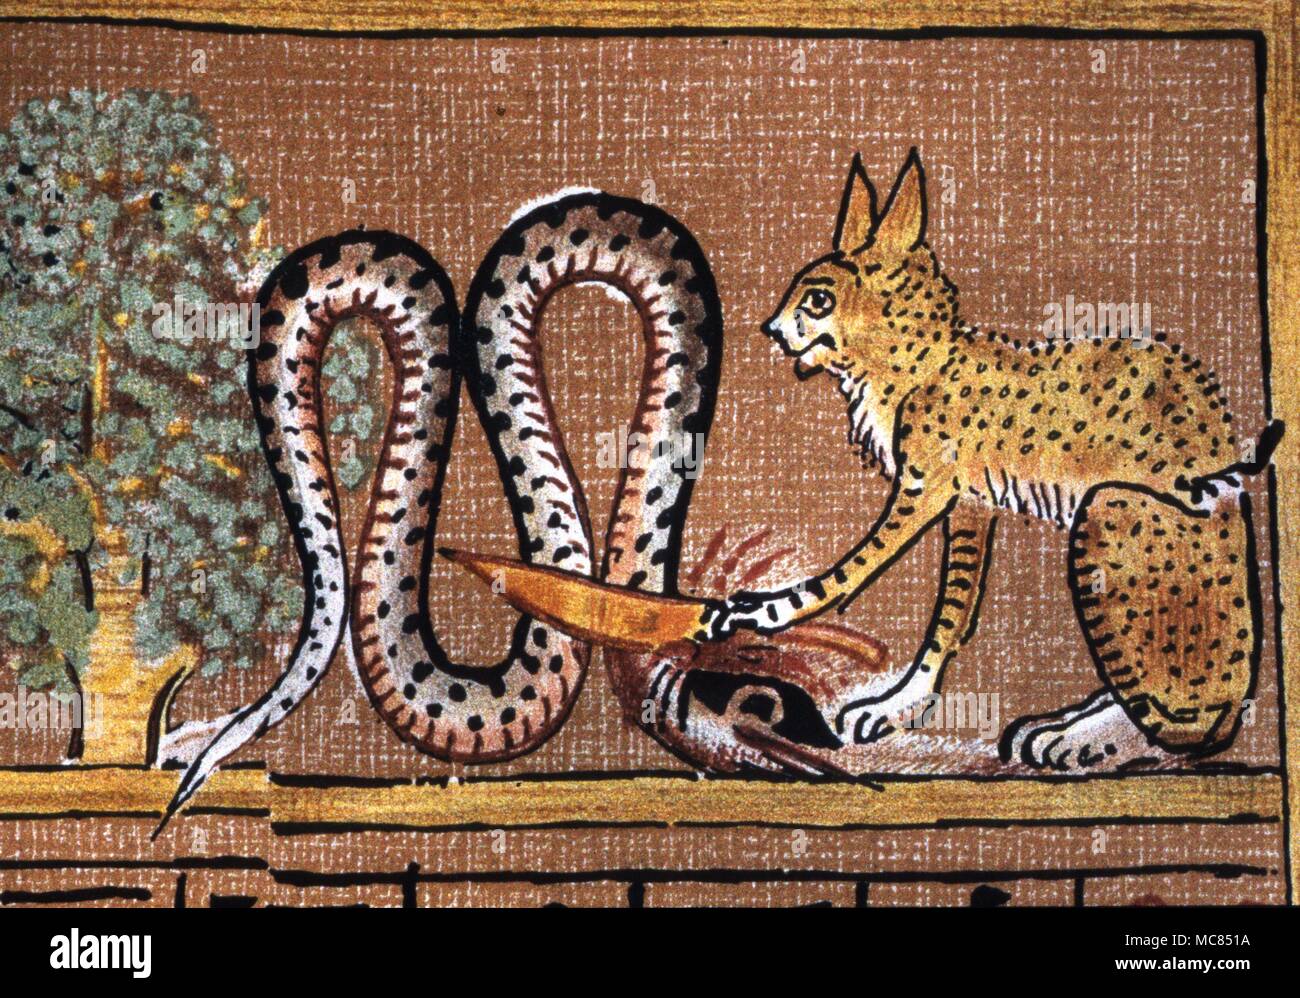 The original serpent of demonic lore - Apep, a spirit of darkness. From the lithographic copy of the papyrus of Hunefer, in Wallis Budge's 'The Egyptian Book of the Dead.' Stock Photo